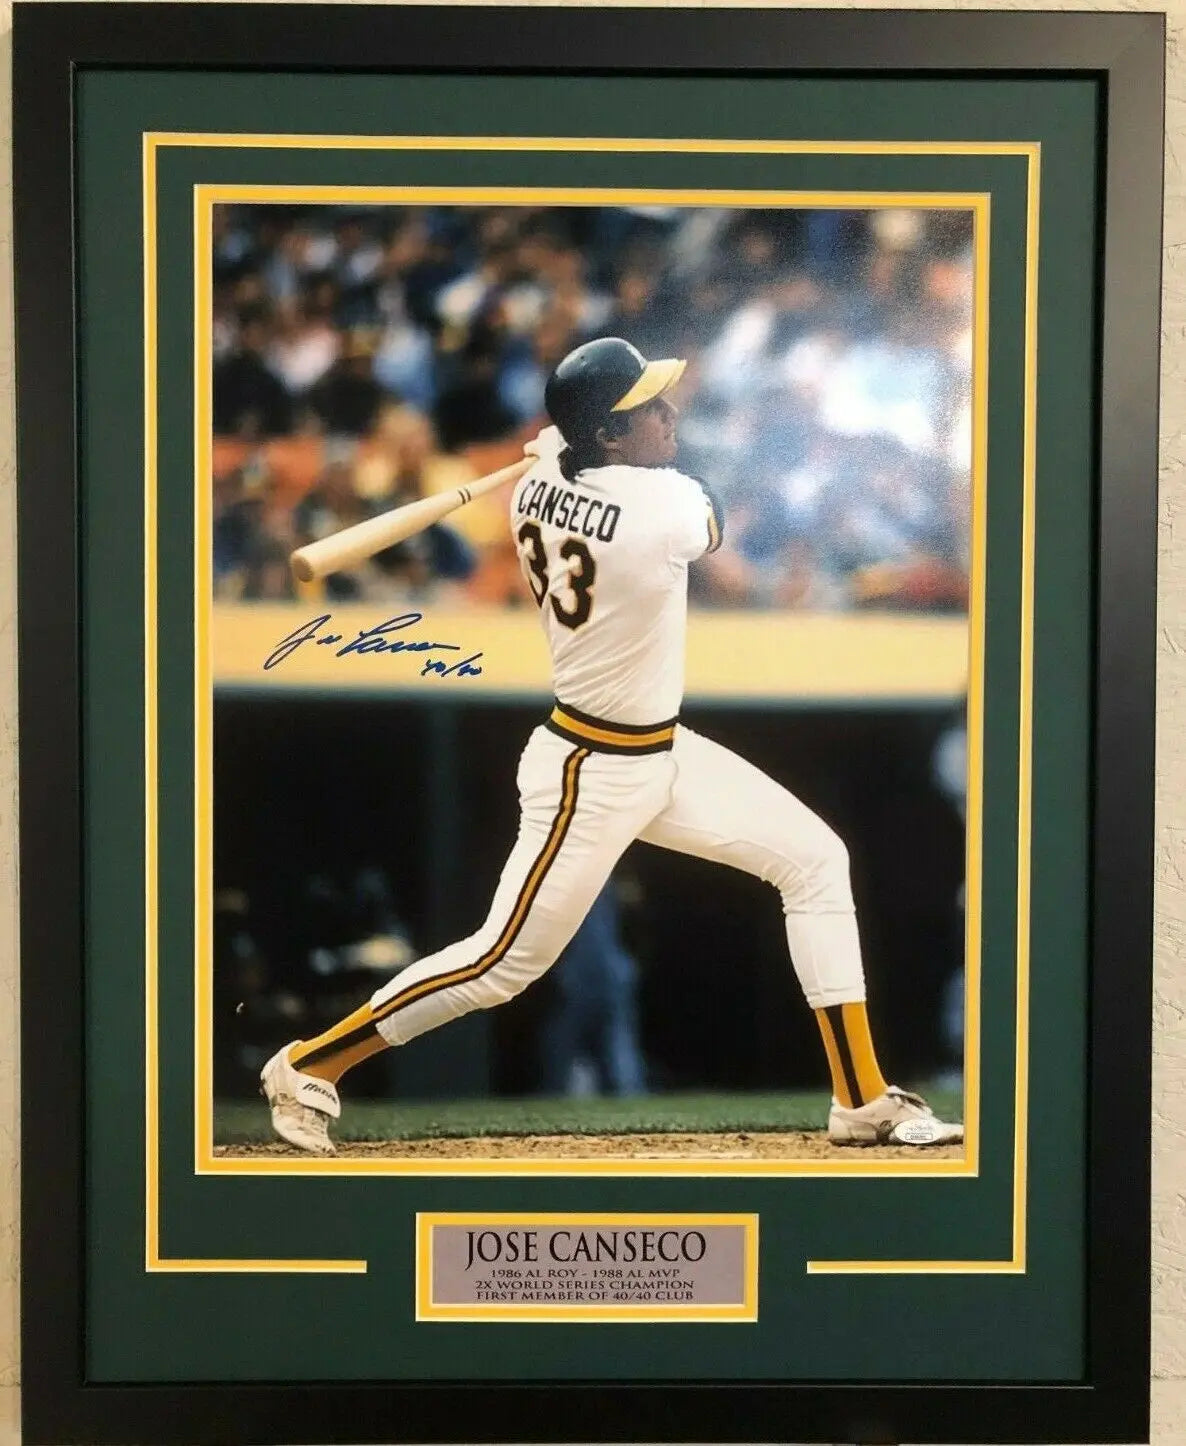 Jose Canseco Autographed Oakland Athletics A's Framed 16x20 Photo